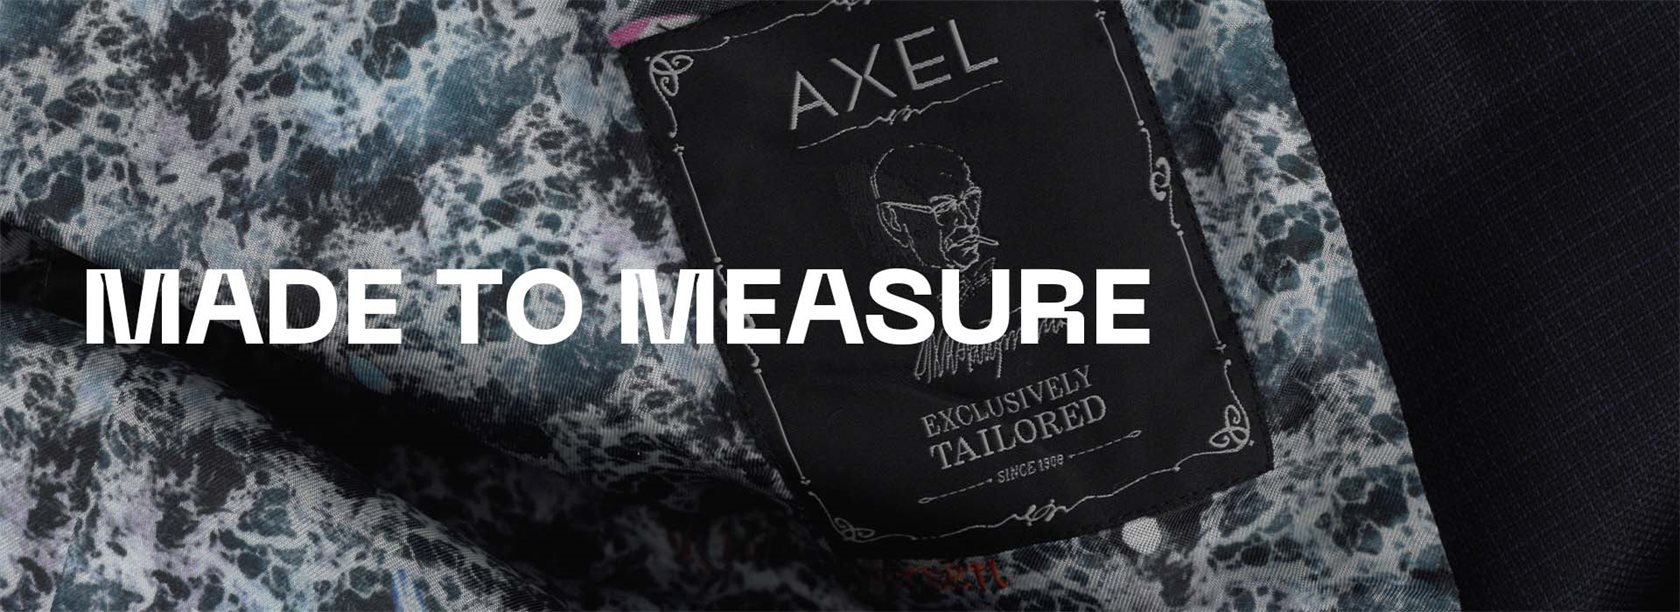 AXEL Made 2 Measure